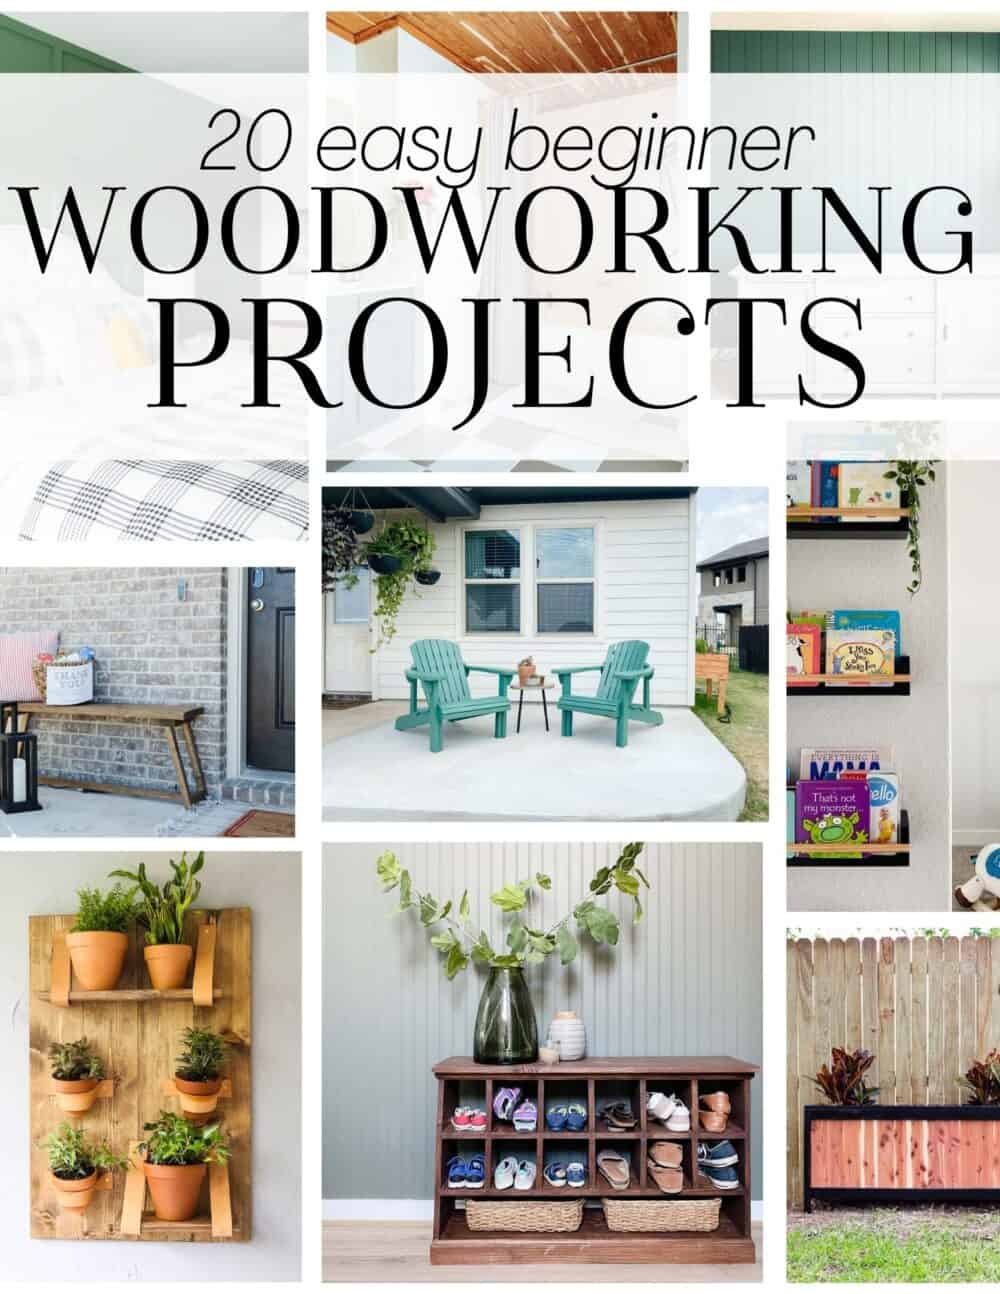 Collage of woodworking projects with text overlay - beginner woodworking projects 